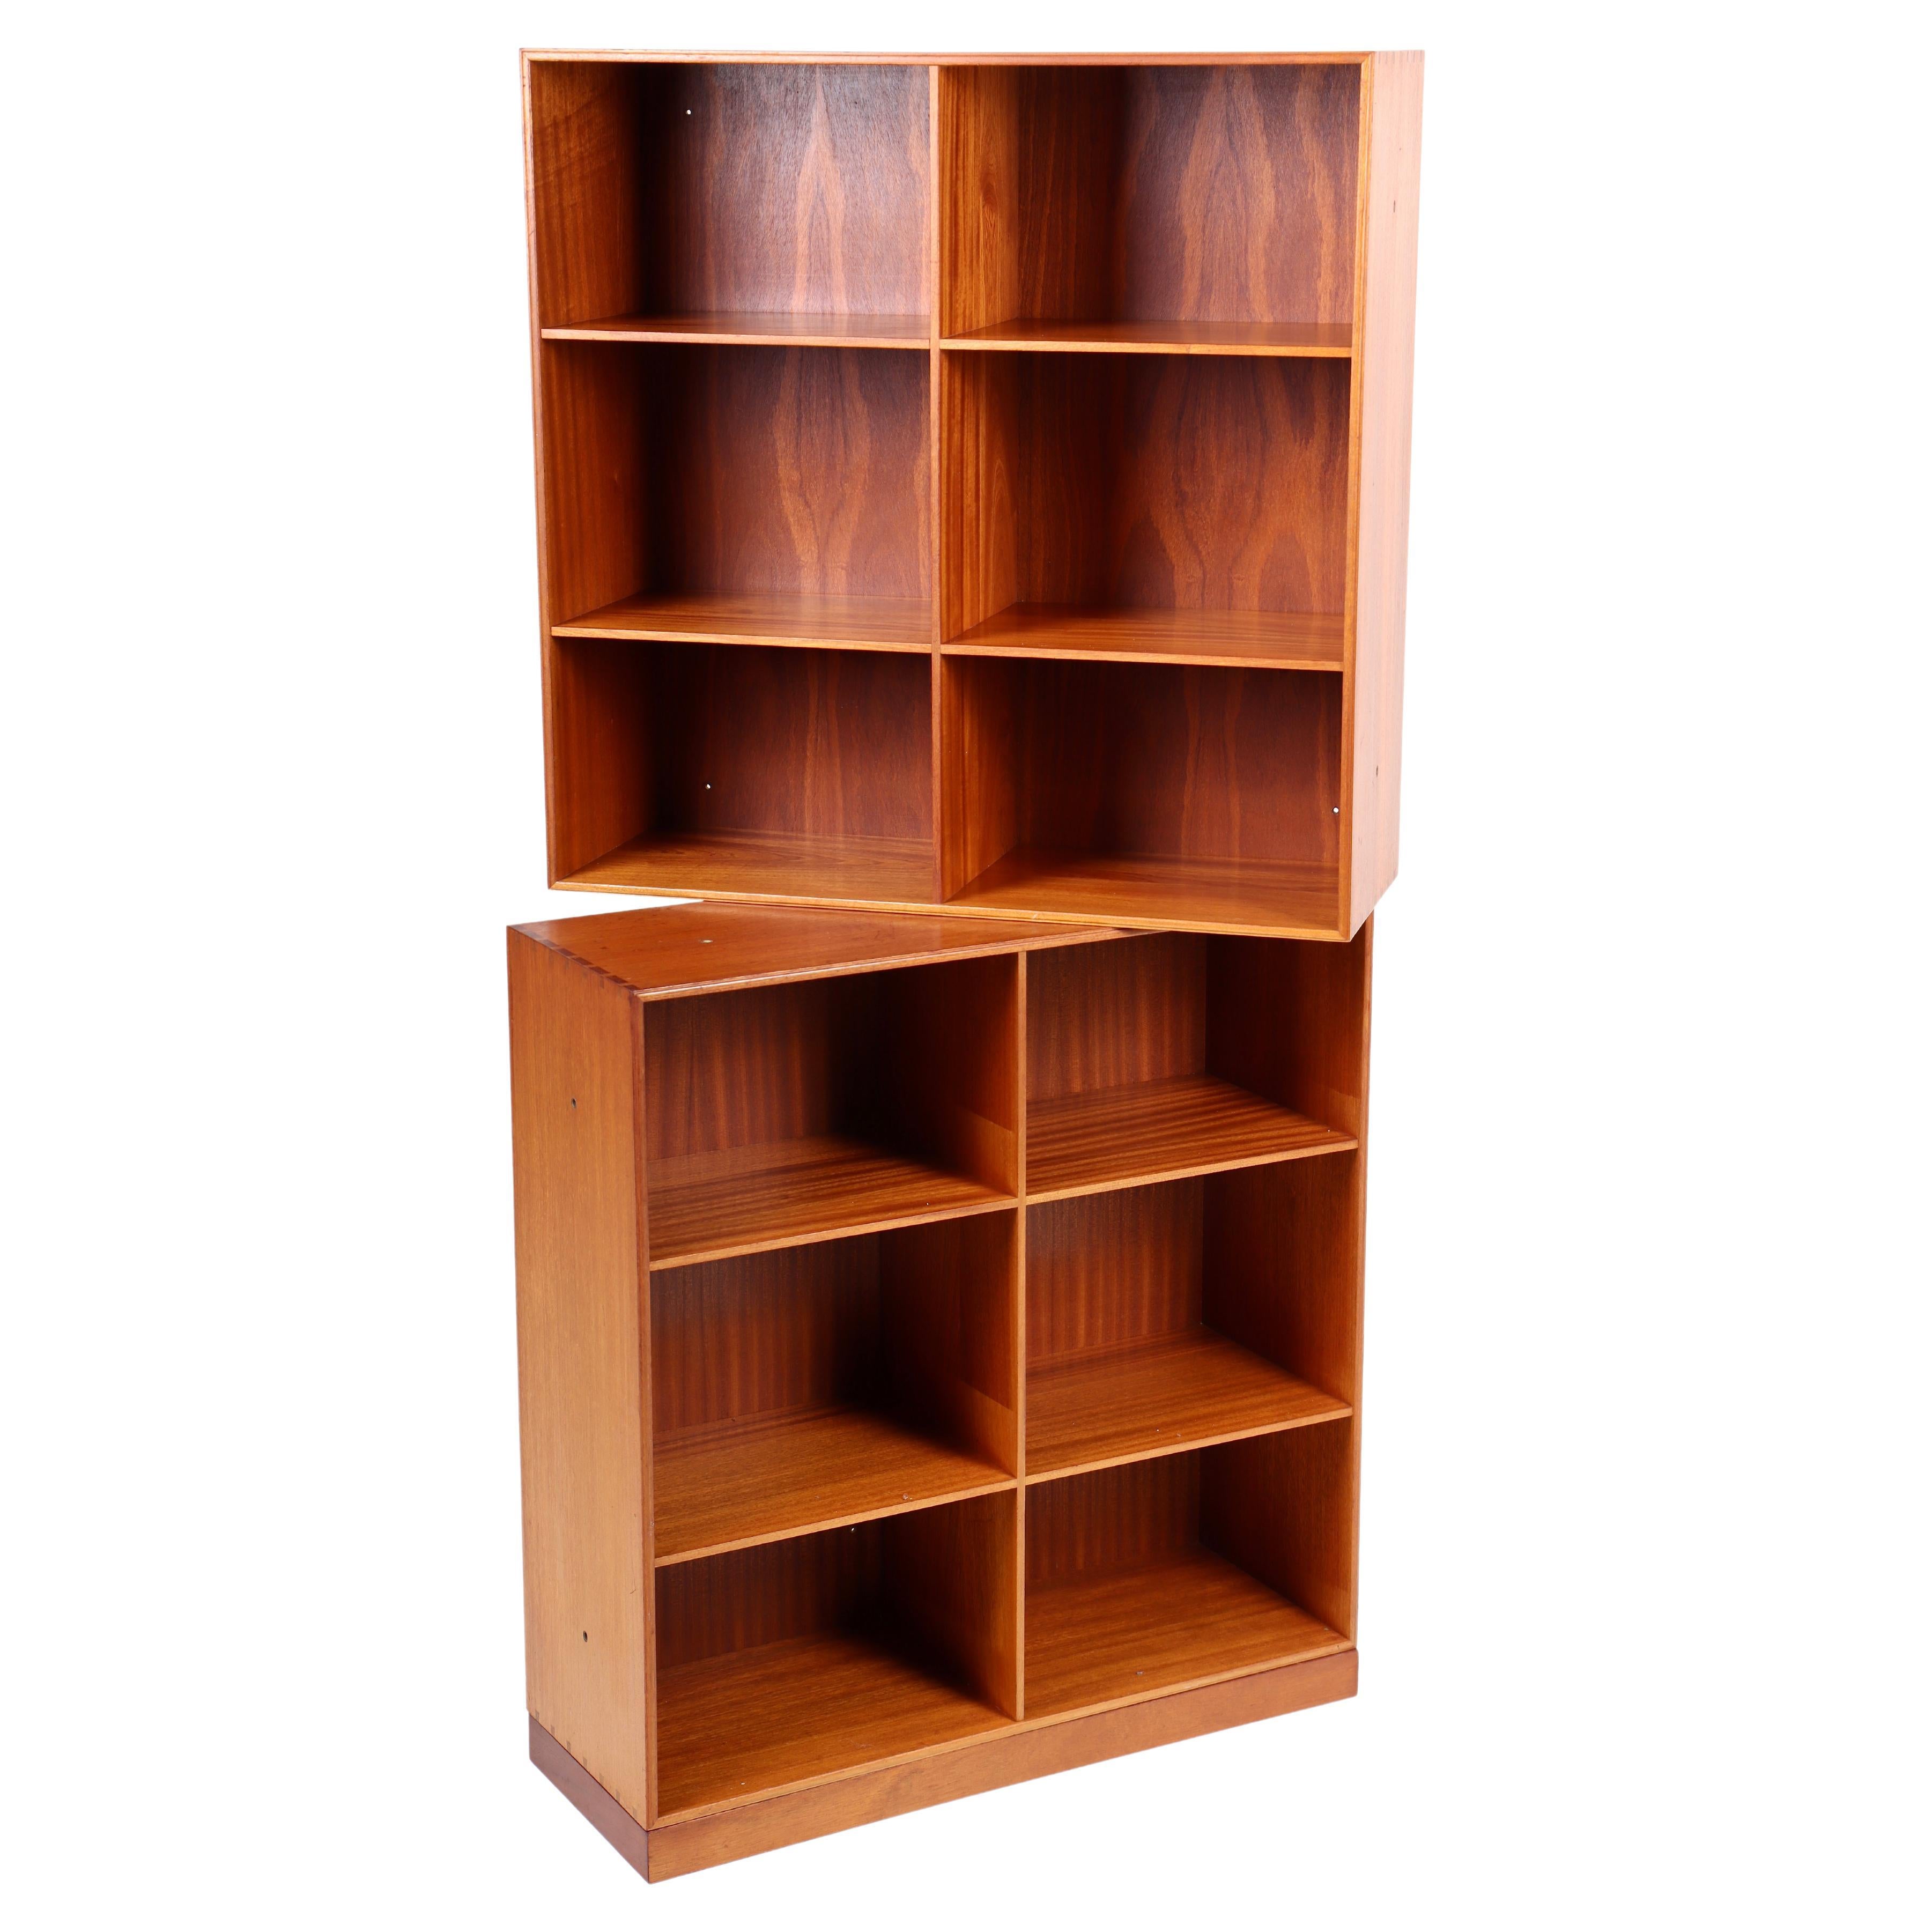 Pair of Bookcases in Mahogany by Mogens Koch, Danish Design, Midcentury, 1950s